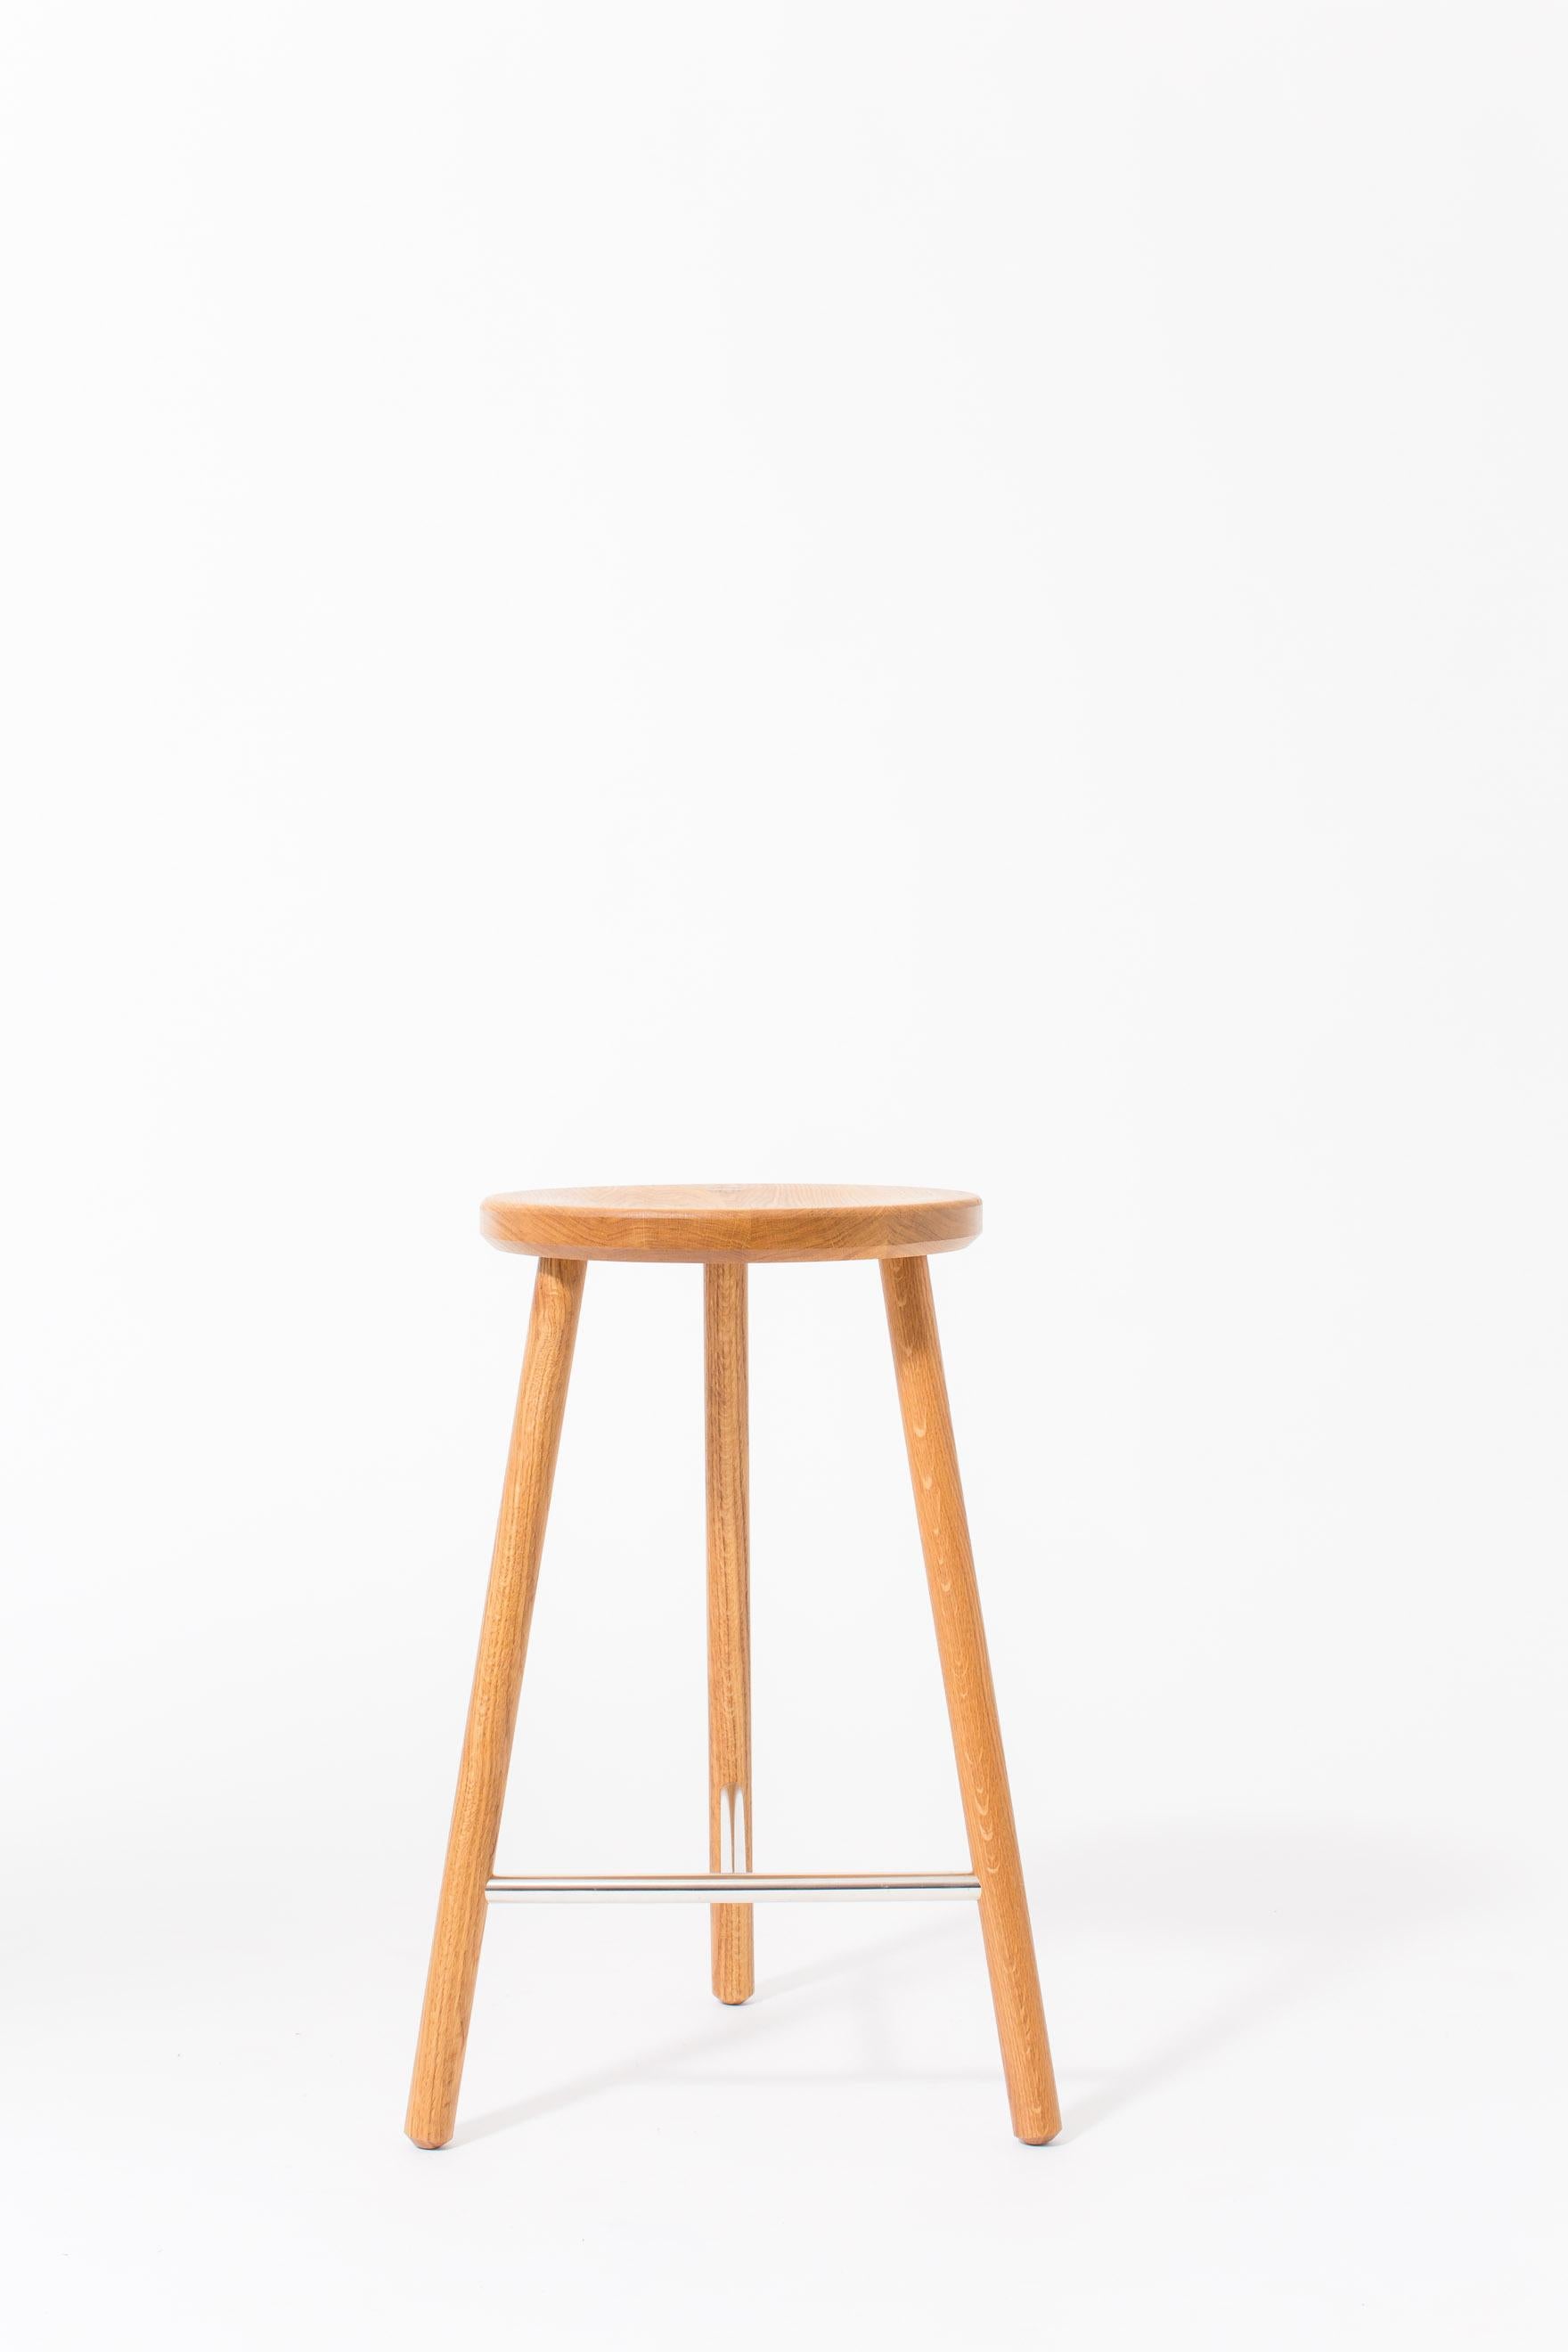 The scout stool has a slim design, allowing it to be tucked into small spaces with a minimal footprint.

Shown in natural white oak and satin nickel. Domestic hardwood species available include white oak, walnut, maple or ash. Hand rubbed oil